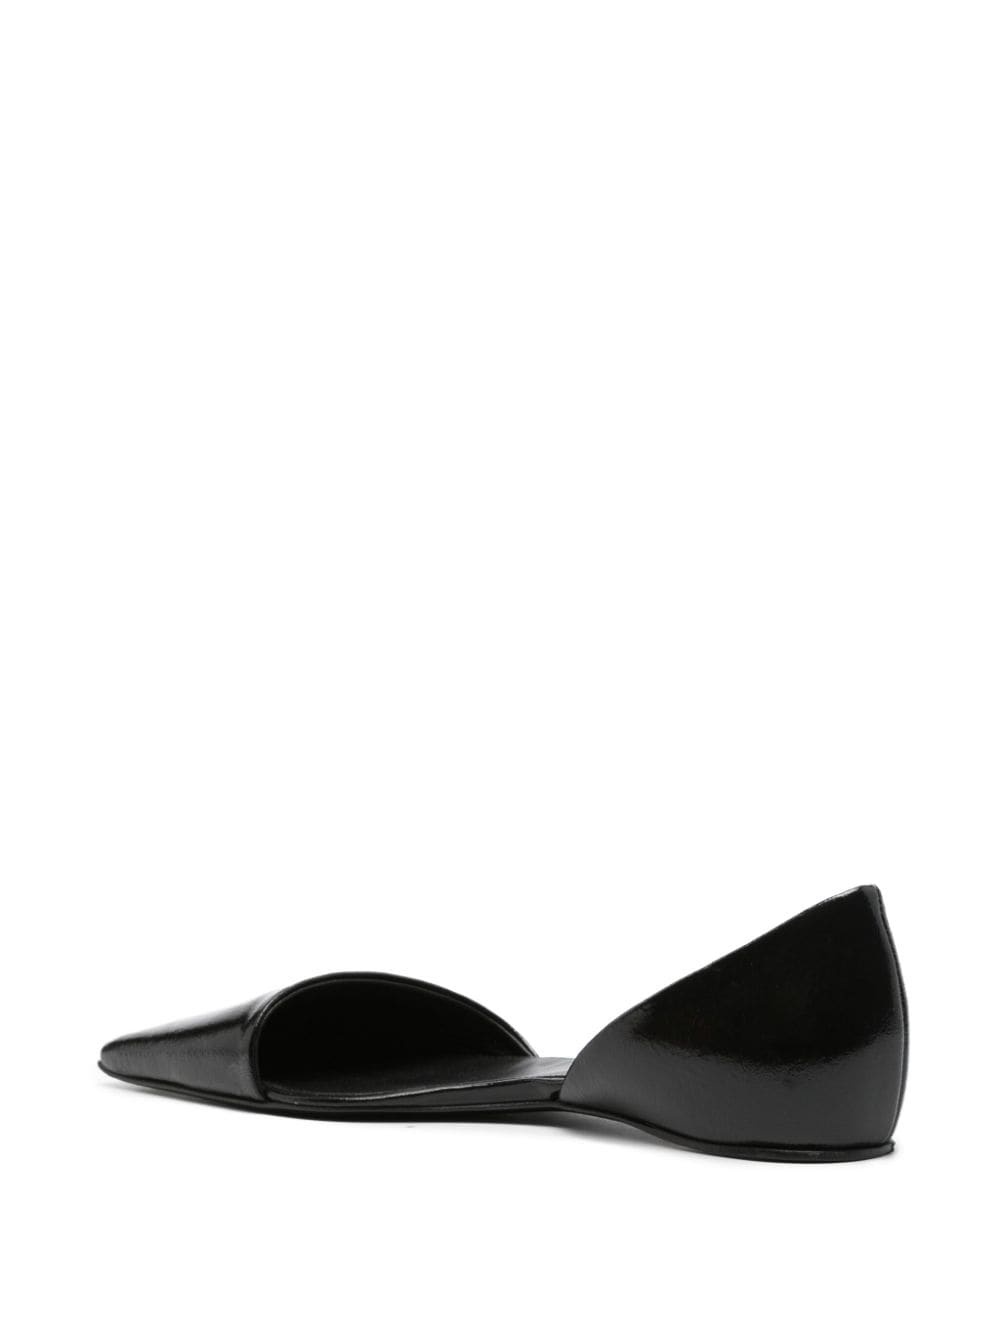 The Asymmetric d'Orsay leather ballerina shoes - 3